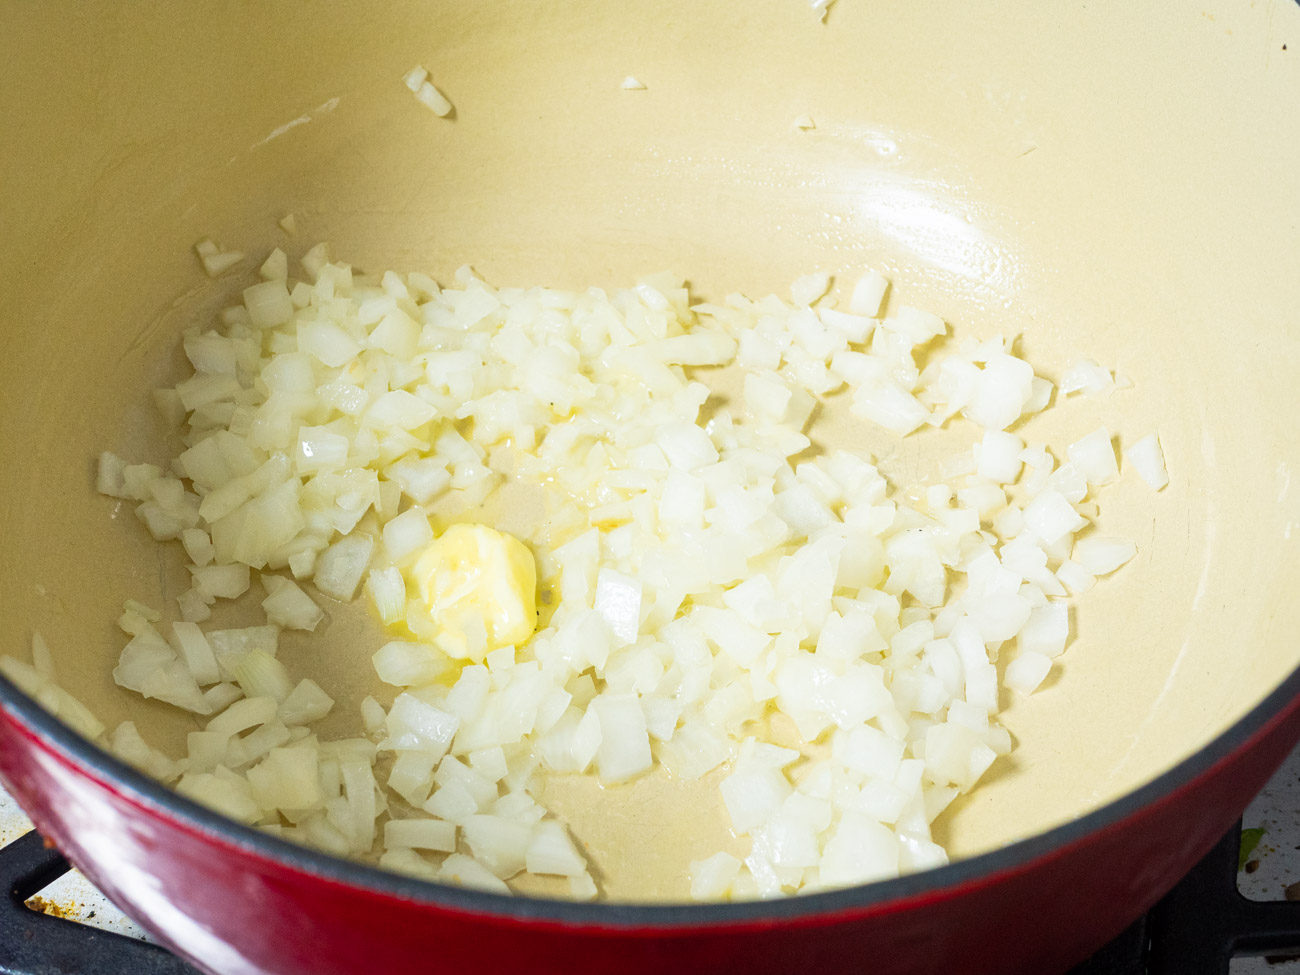 Melt butter in a large pot over medium-high heat. Add in the onion and sauté for 3-5 minutes, until tender.